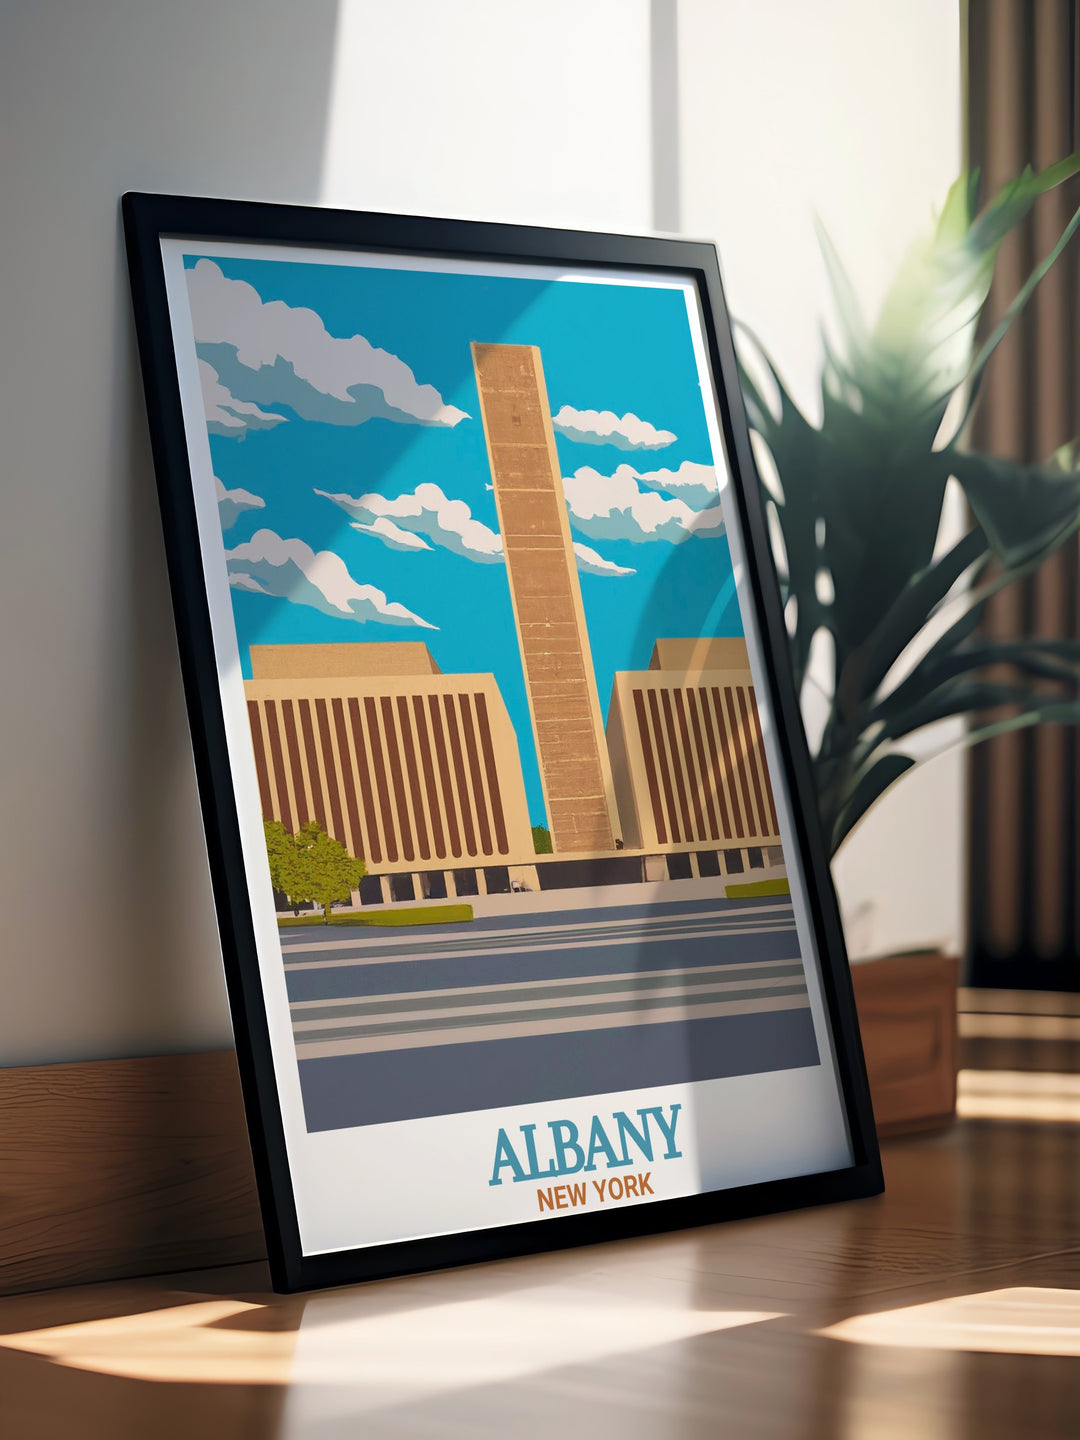 Beautiful Empire State Plaza prints depicting Albanys striking buildings and open spaces a must have for anyone interested in New York State decor and artwork ideal for gifting and enhancing personal art galleries.